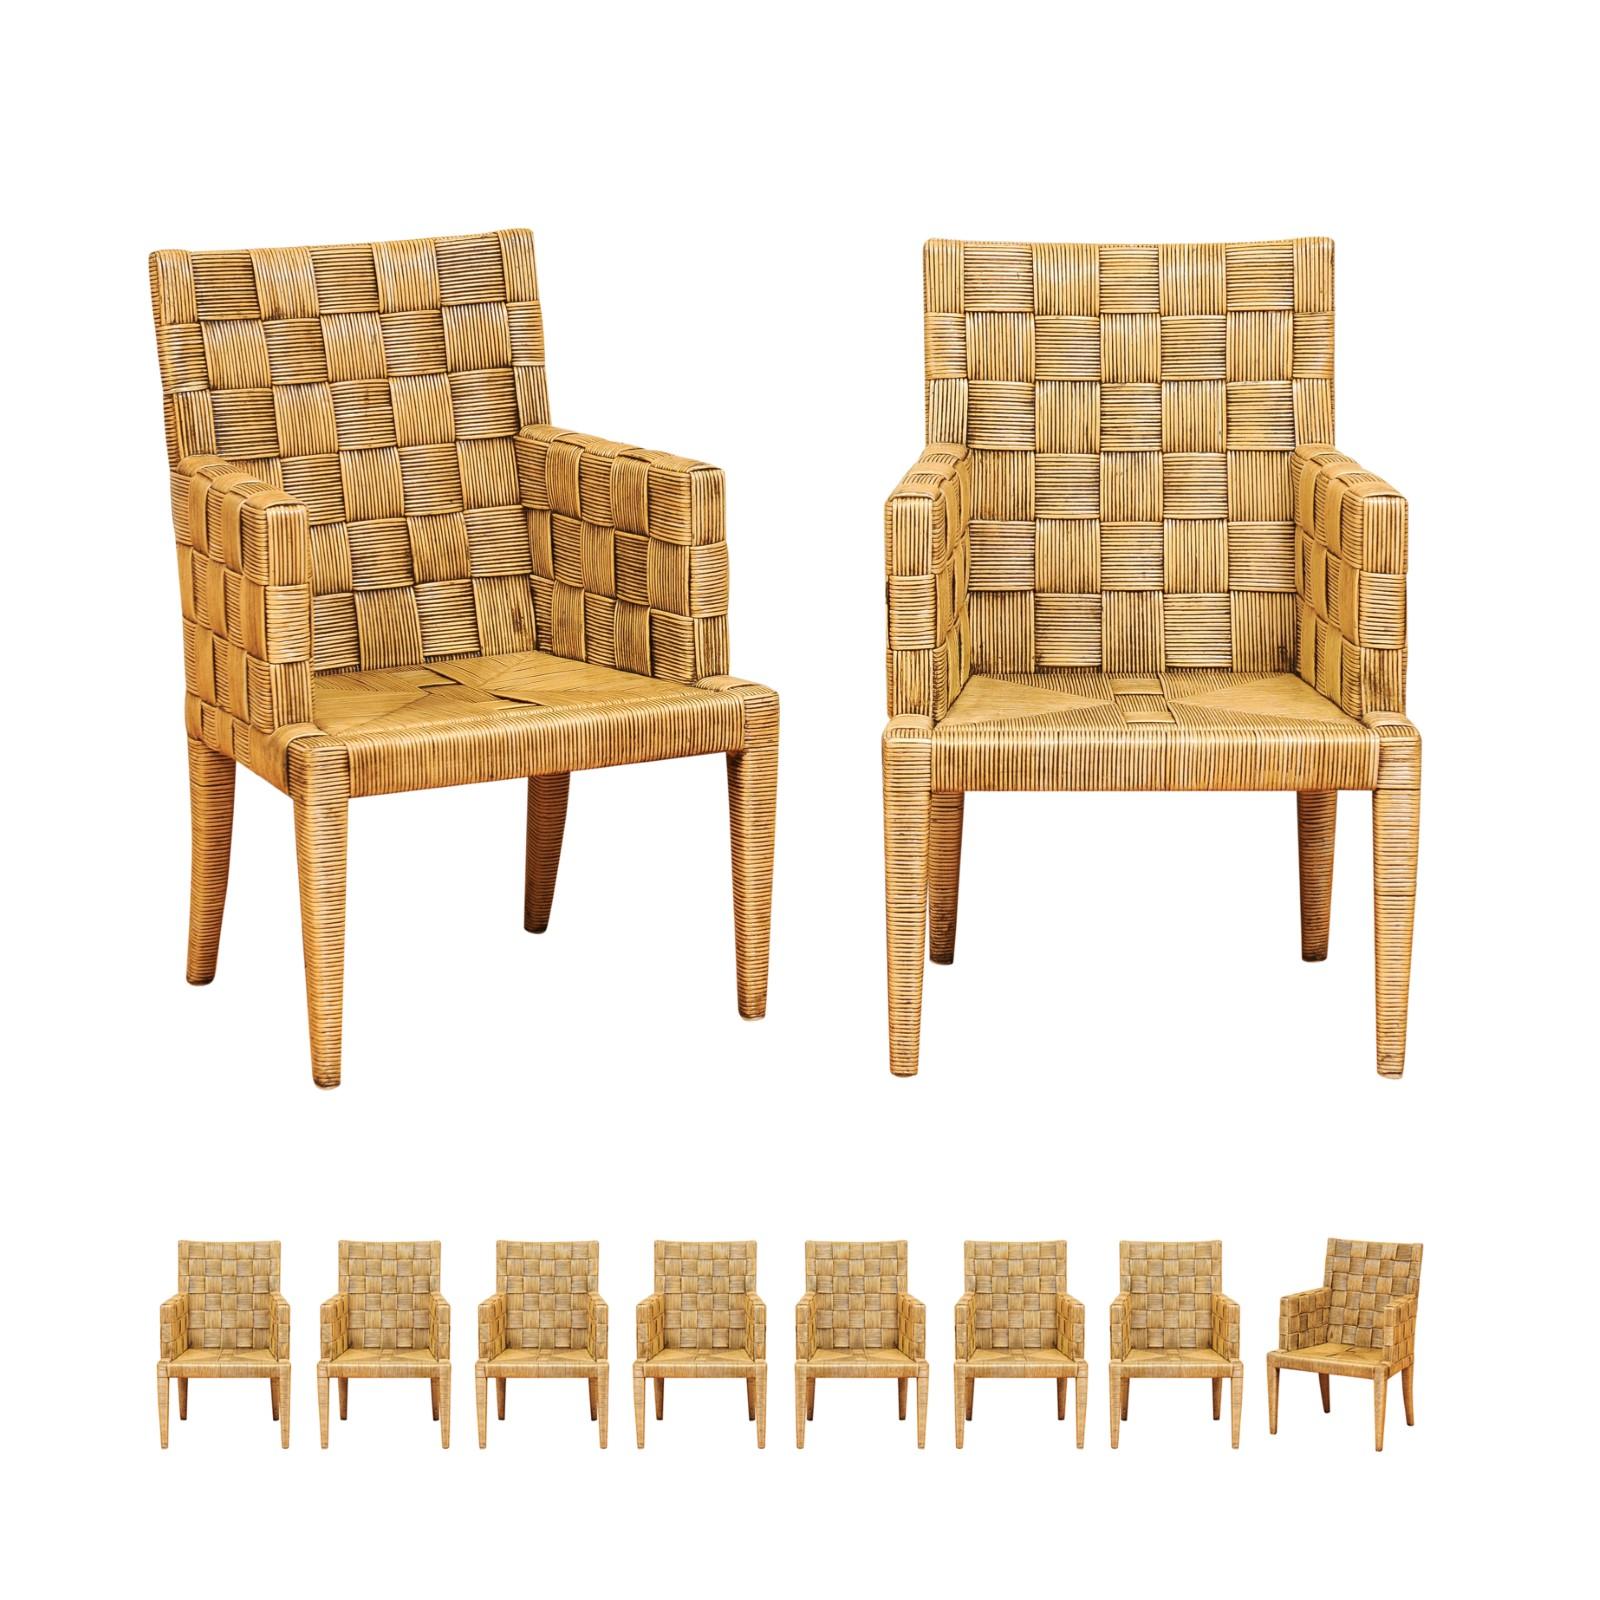 Dazzling Set of 10 Block Island Cane Armchairs by John Hutton for Donghia For Sale 11